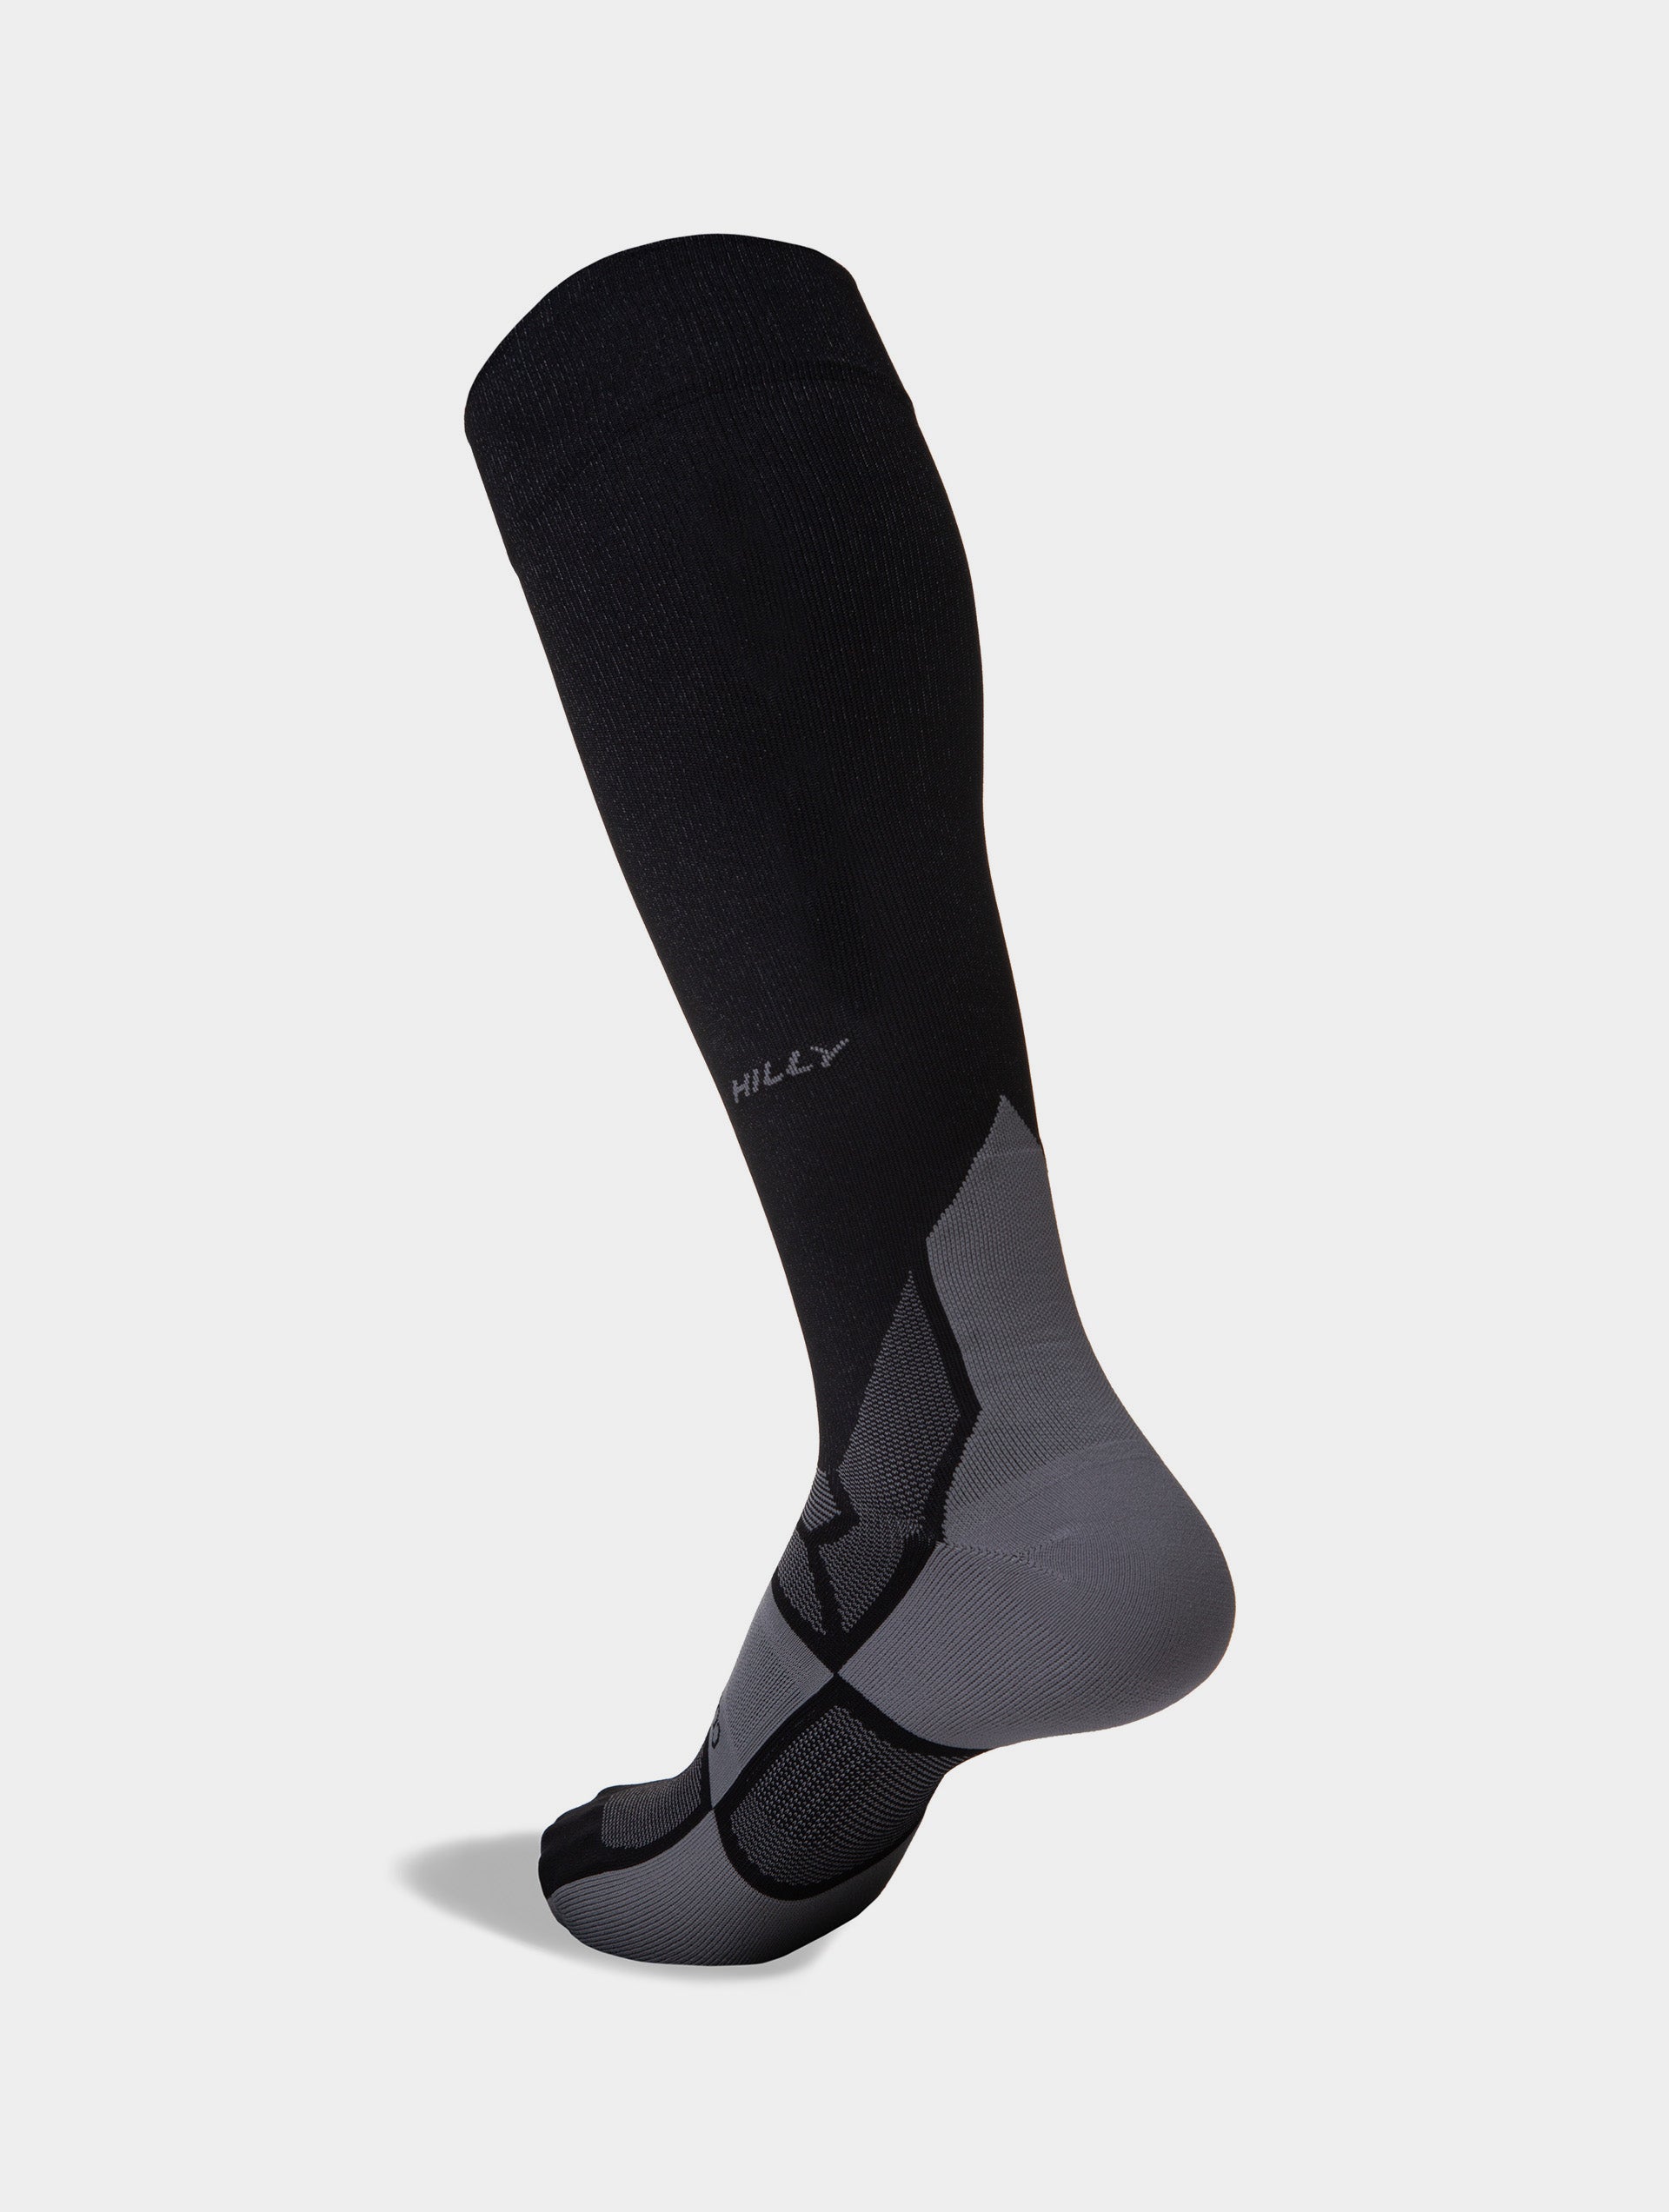 Pulse Sock Min | Hilly – Ronhill